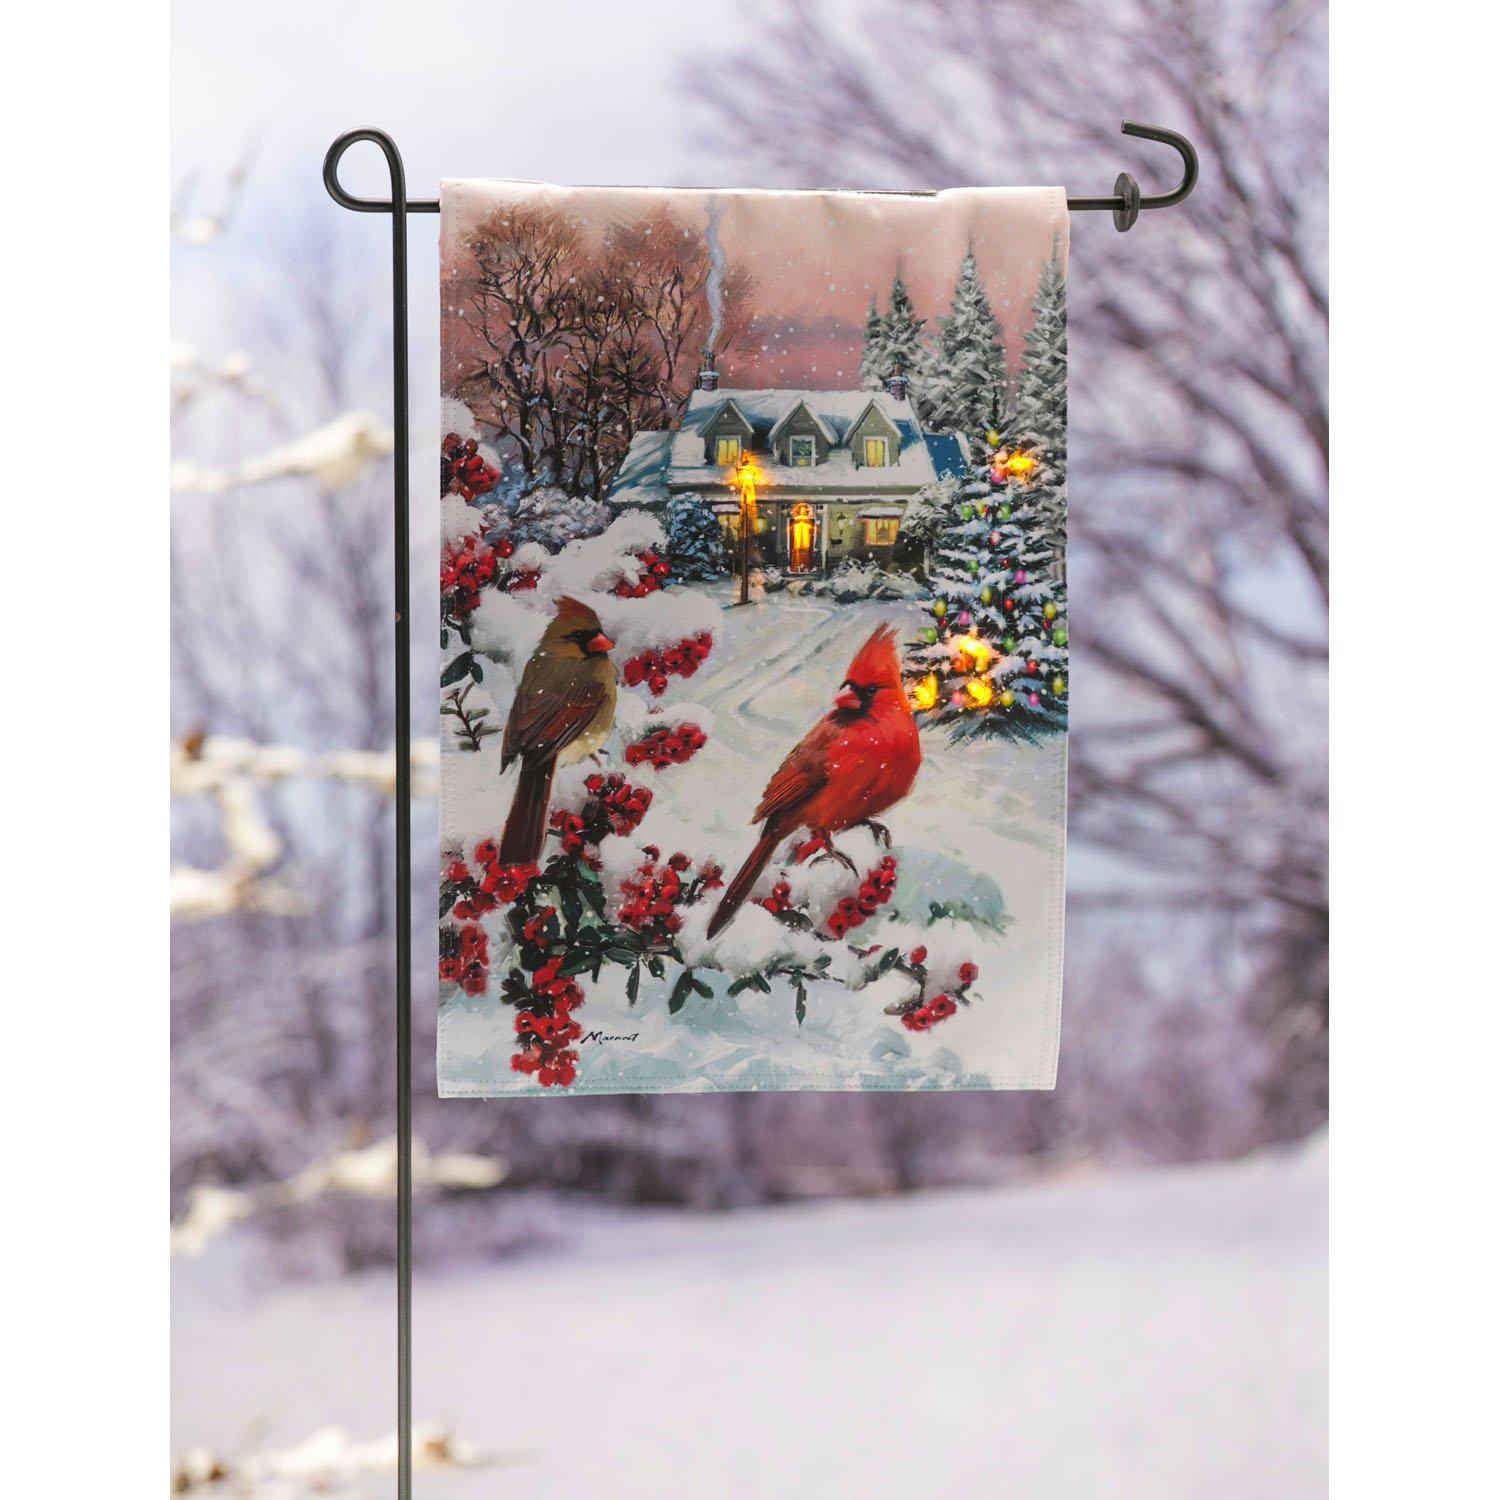 The Winter Perch Solar LED garden flag features a pair of cardinals sitting on snow covered branches with a cozy home in the background. 